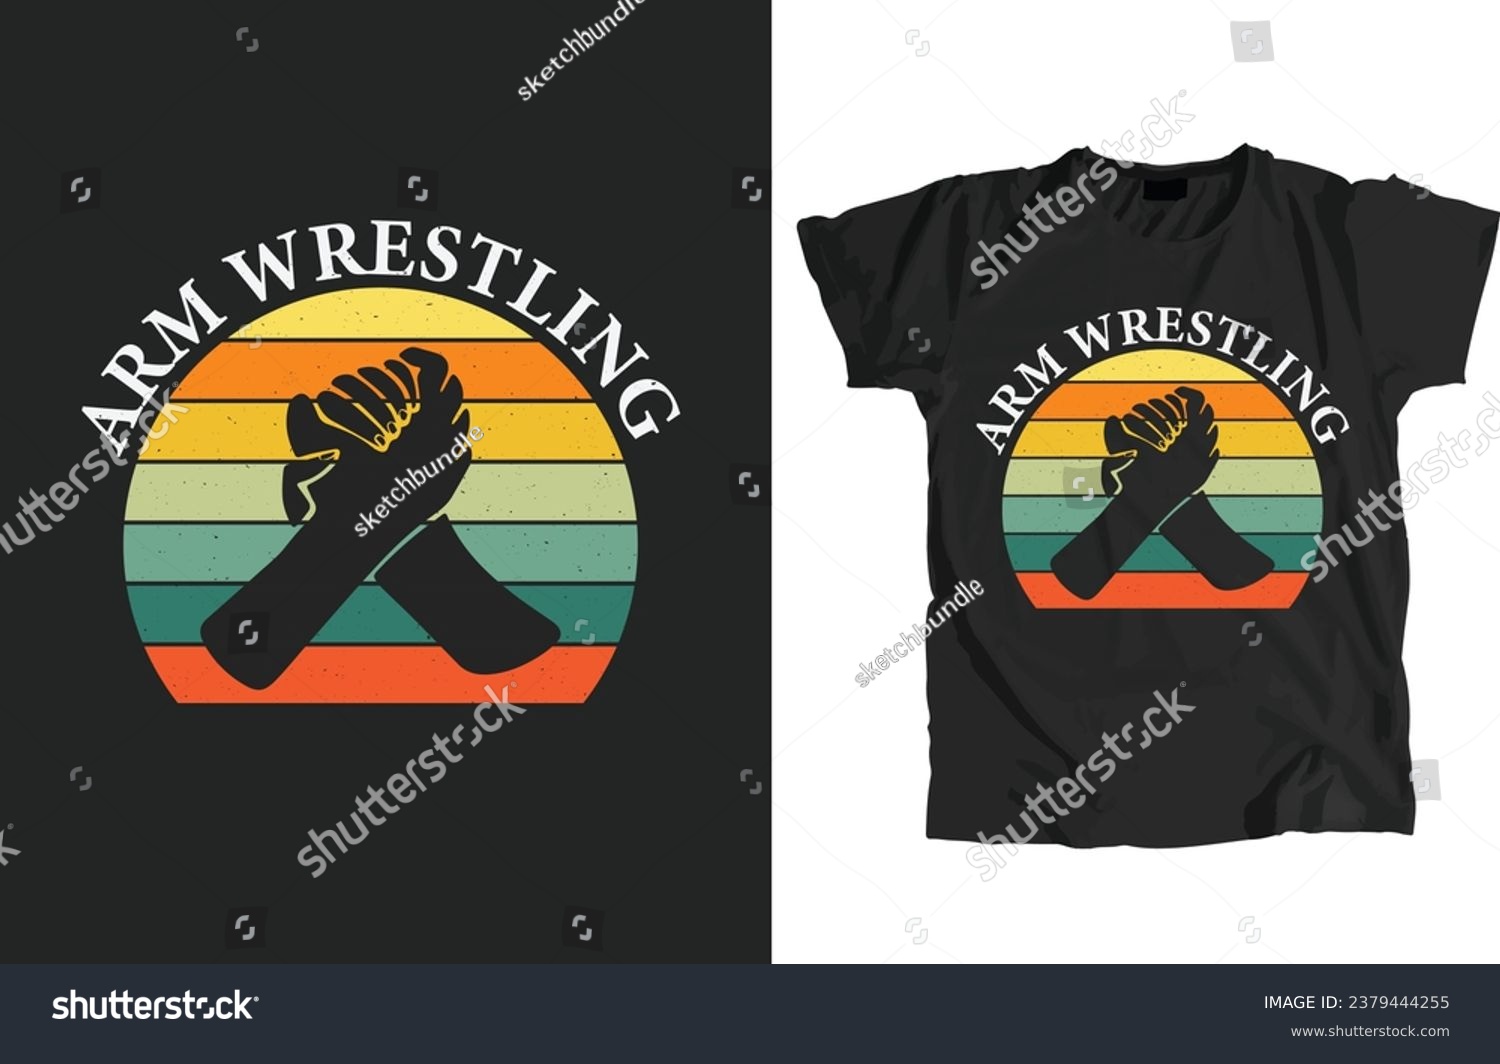 SVG of Arm Wrestling Design File. That allow to print instantly Or Edit to customize for your items such as t-shirt, Hoodie, Mug, Pillow, Decal, Phone Case, Tote Bag, Mobile Popsocket etc. svg